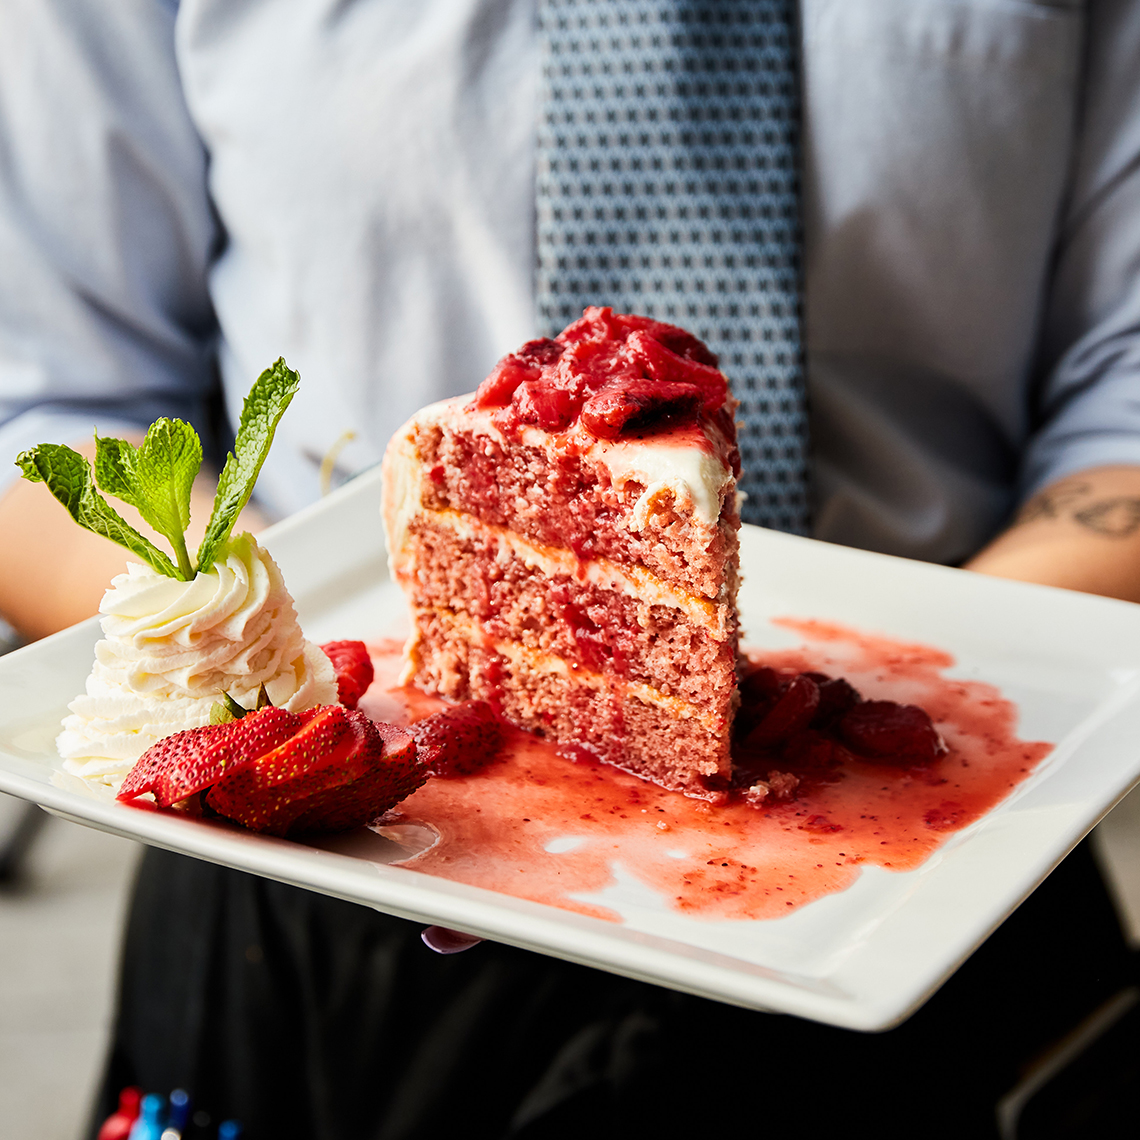 a waiter holds a large plate containing a slice of strawberry cake 